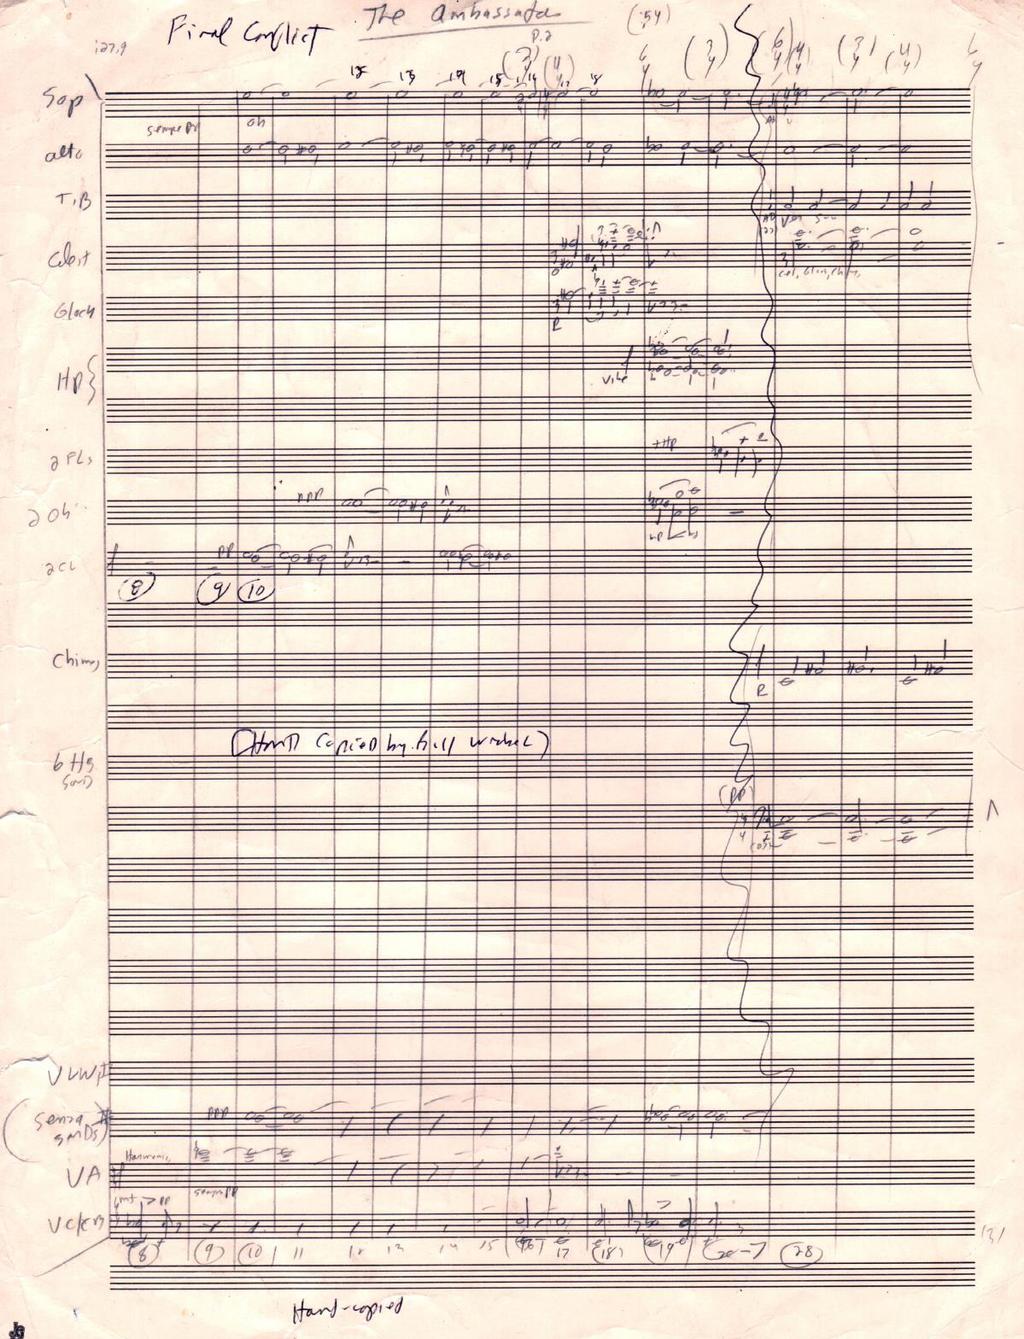 set) play Lines 2 & 3 E dotted half notes tied to dotted half notes next bar to whole notes in Bar 30.